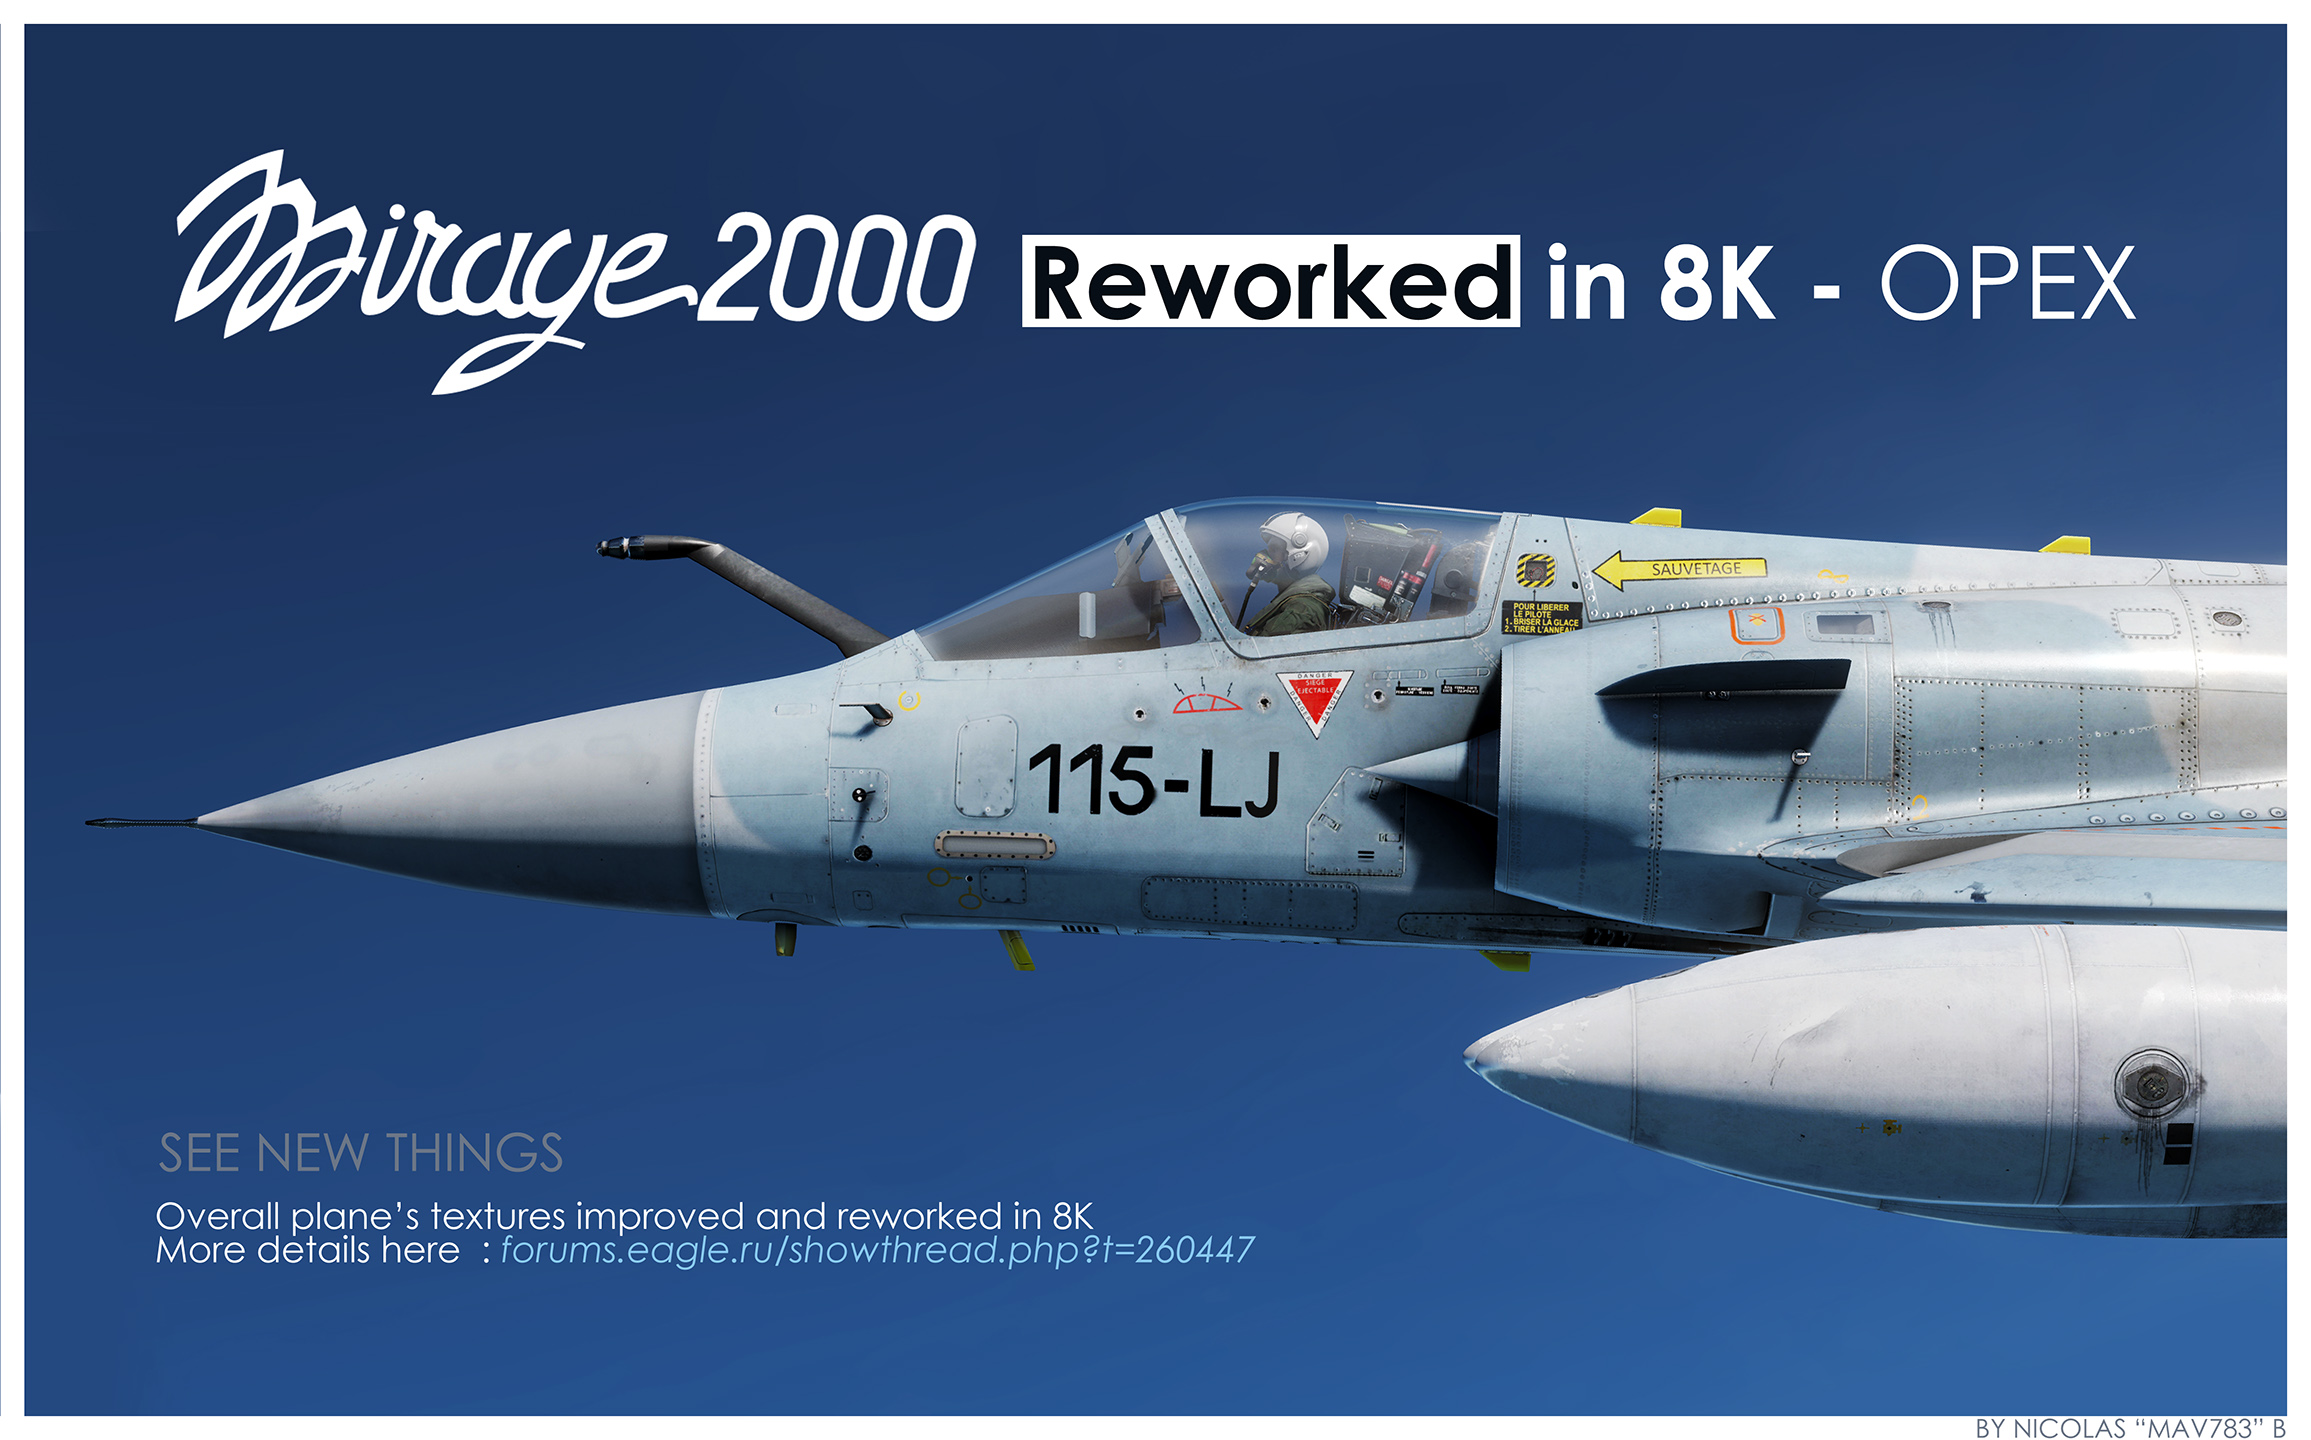 Overall improved and reworked textures in 8K ! - Mirage 2000C - (JSGME ready)